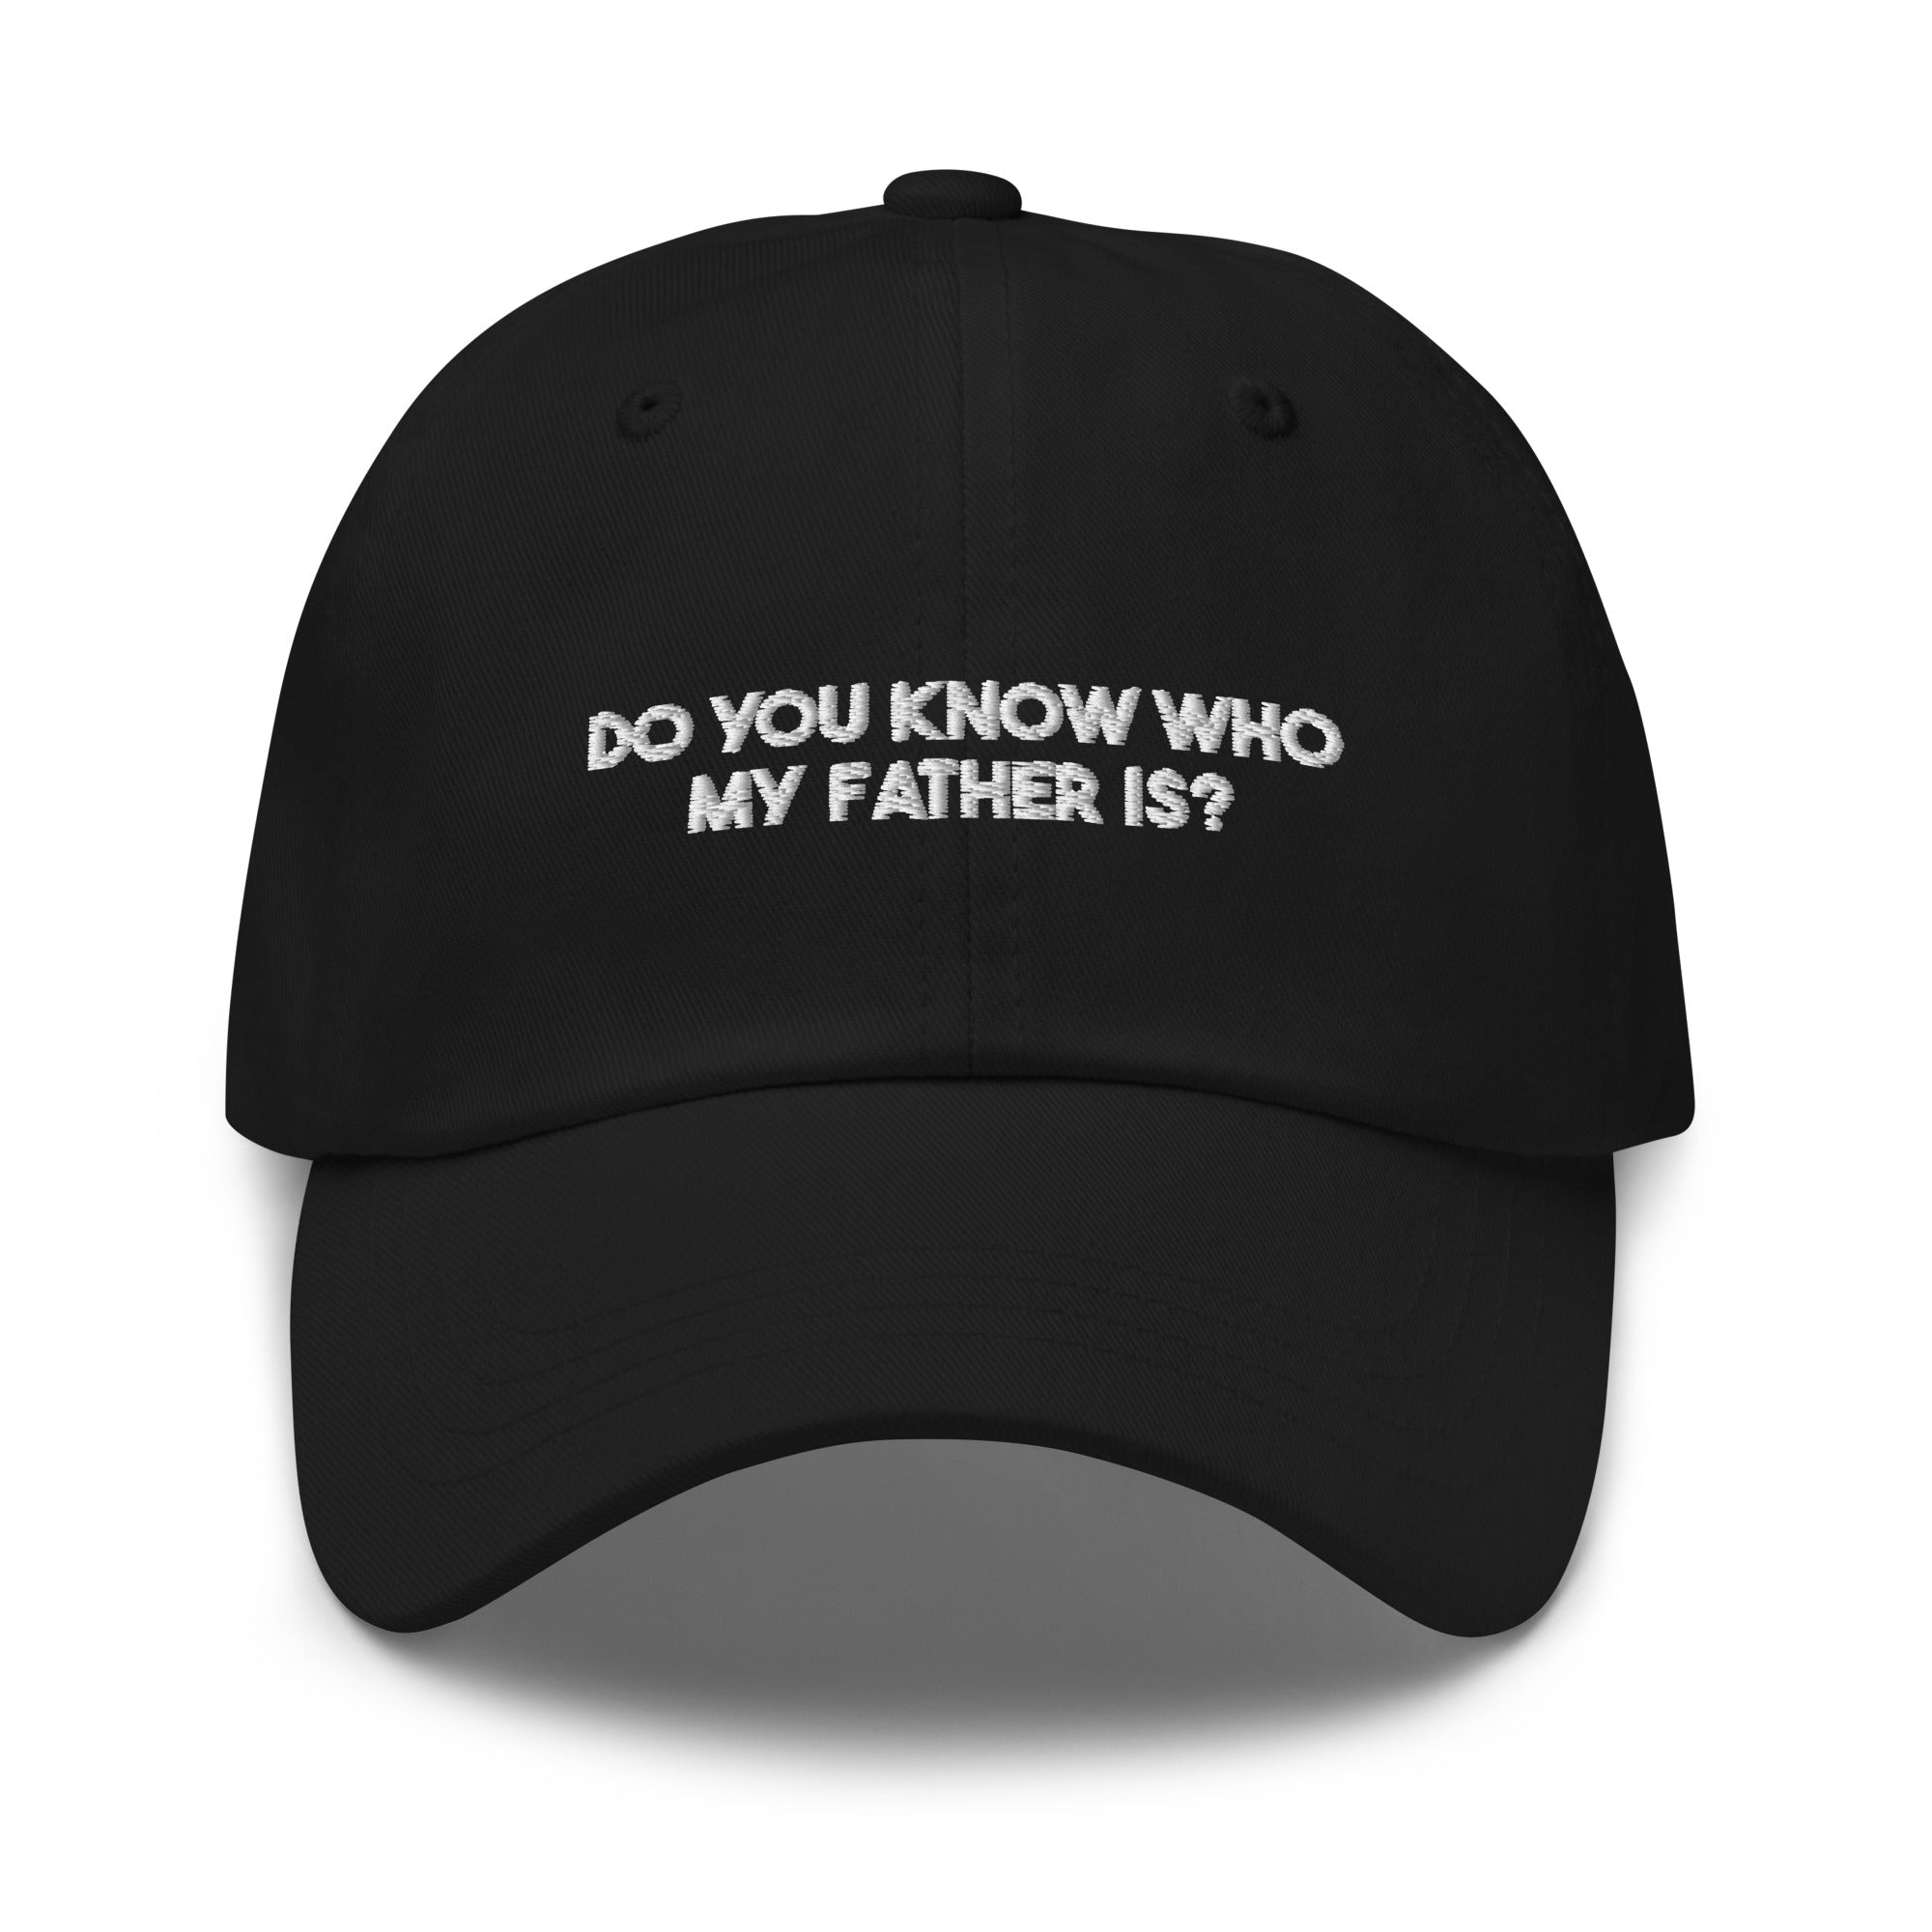 Do You Know Who My Father Is? Dad Hat